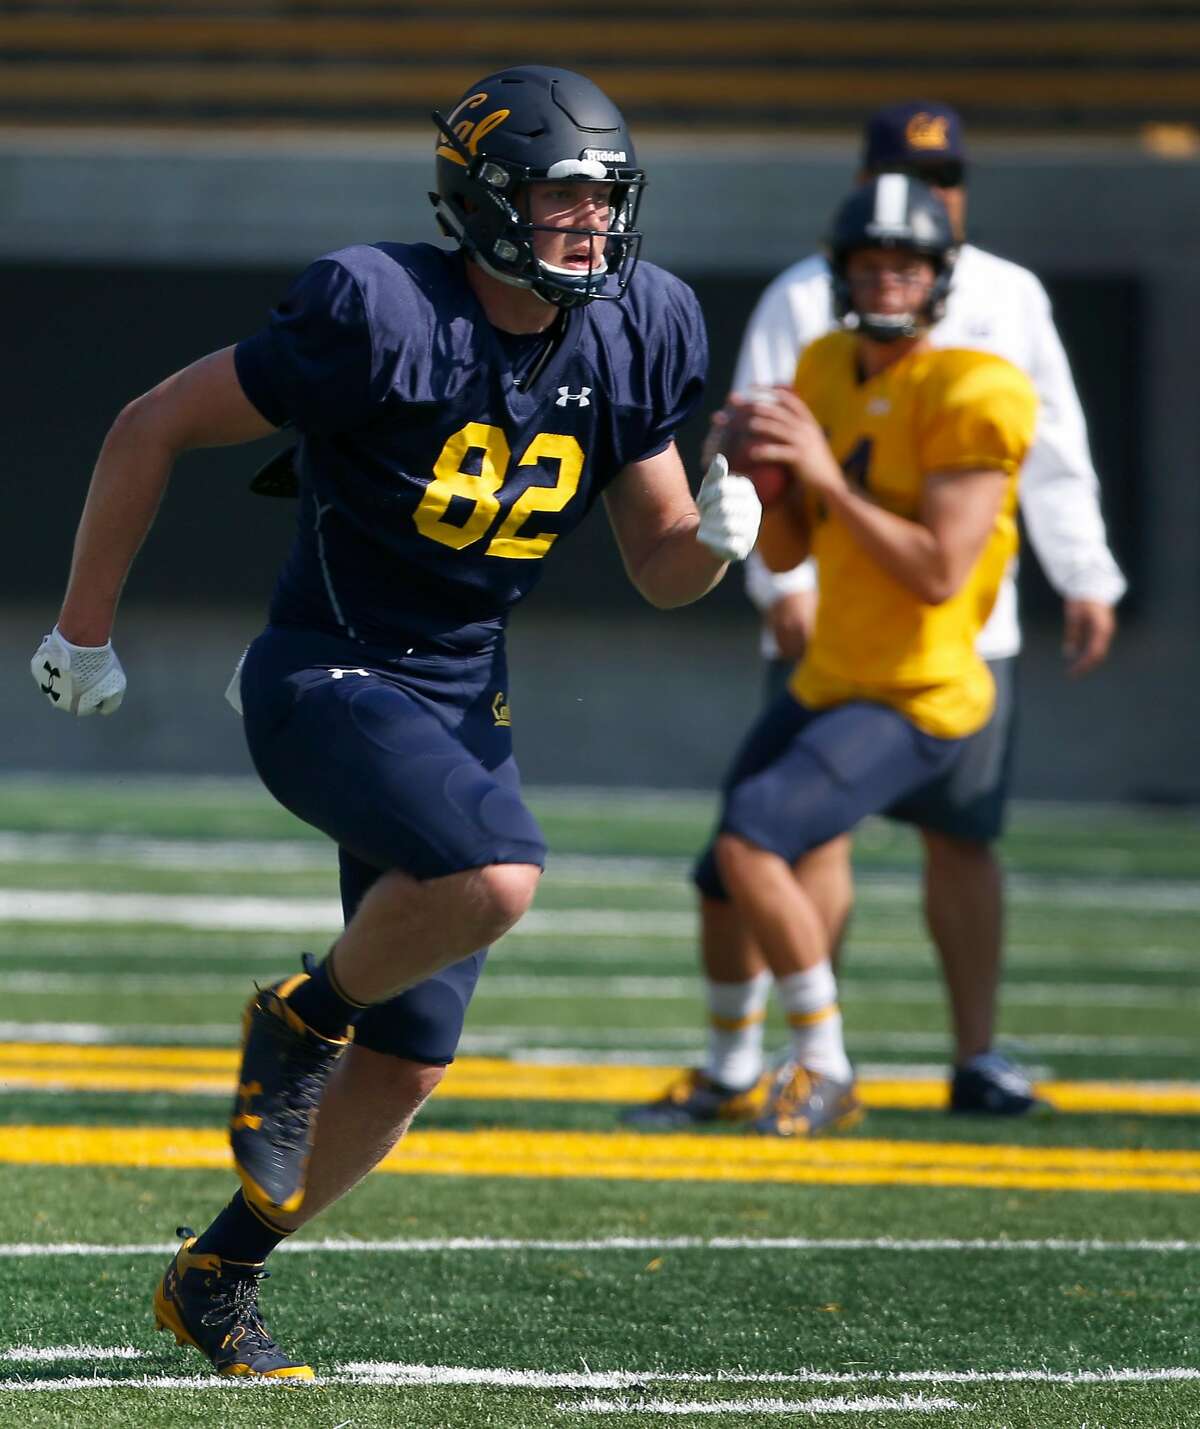 Tight end McCallan Castles runs downfield during a California Bears practice at Memorial Stadium in Berkeley, Calif. on Saturday, Aug. 11, 2018.